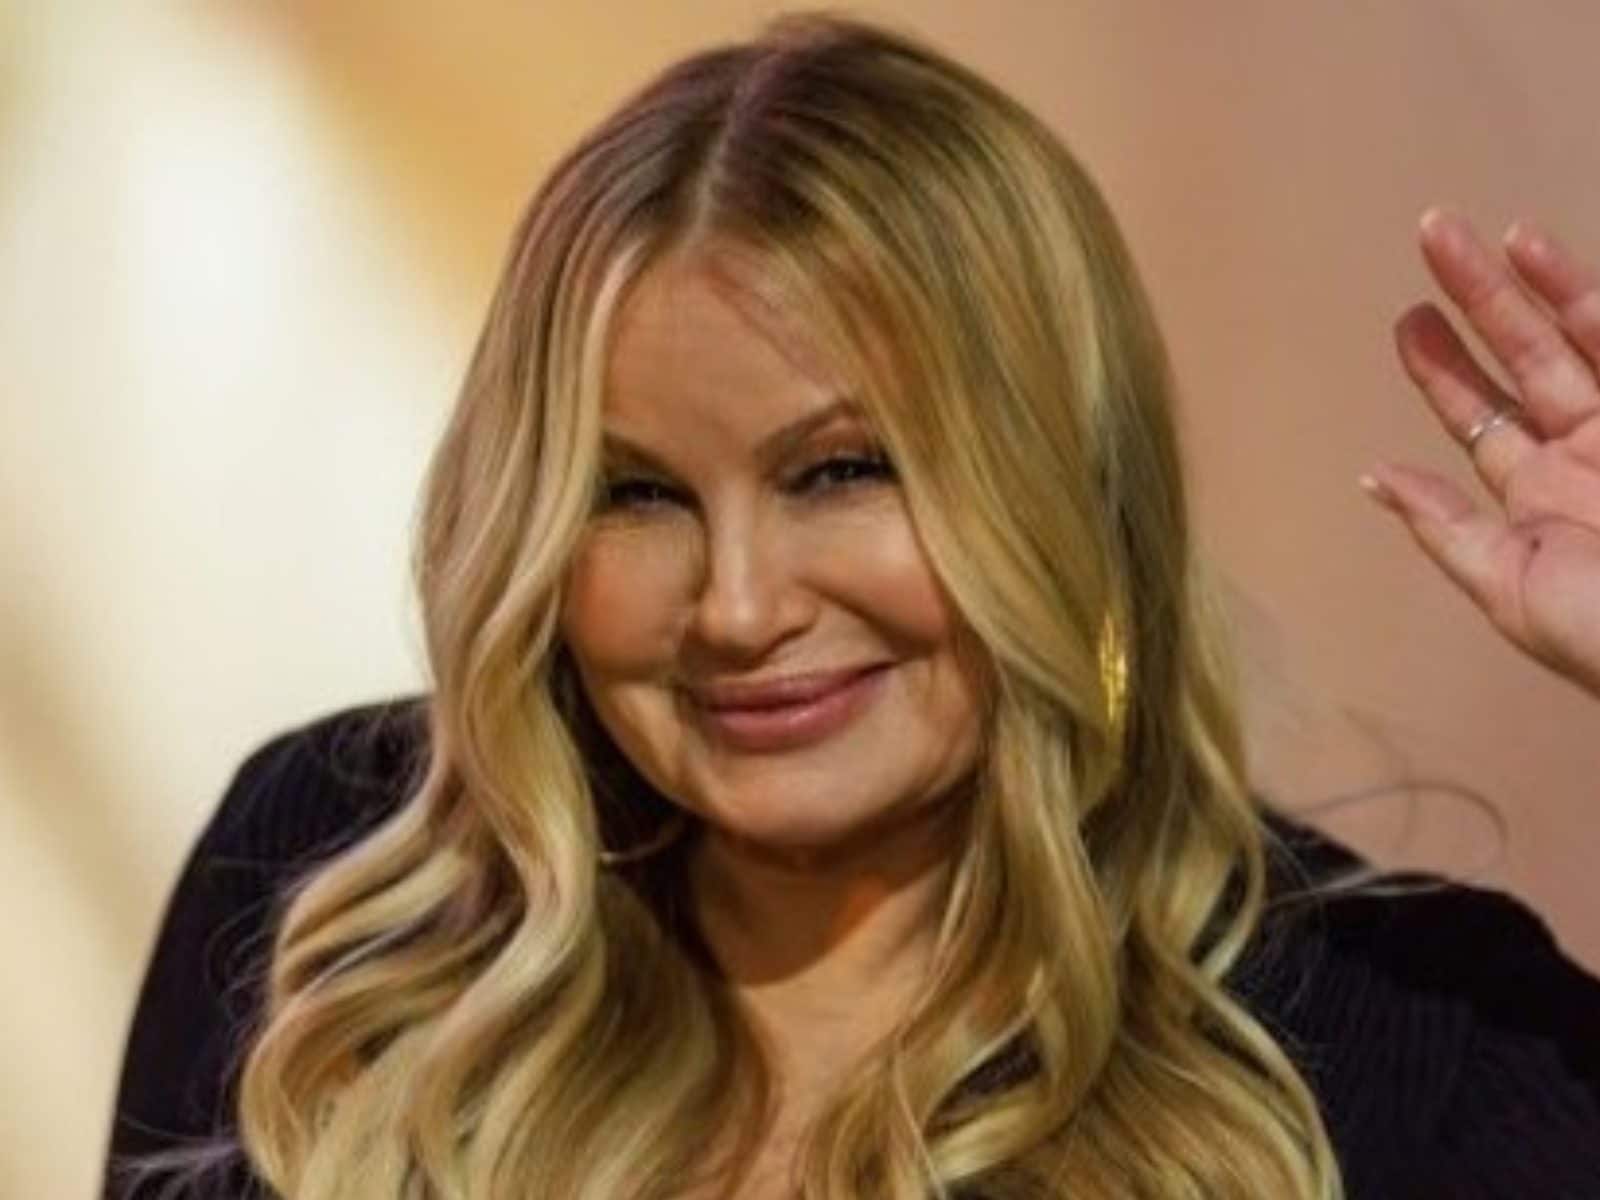 Alia Raffia Fuck - Jennifer Coolidge Admits To Sleeping With 200 People After American Pie:  'Got Lots Of Sexual Action'